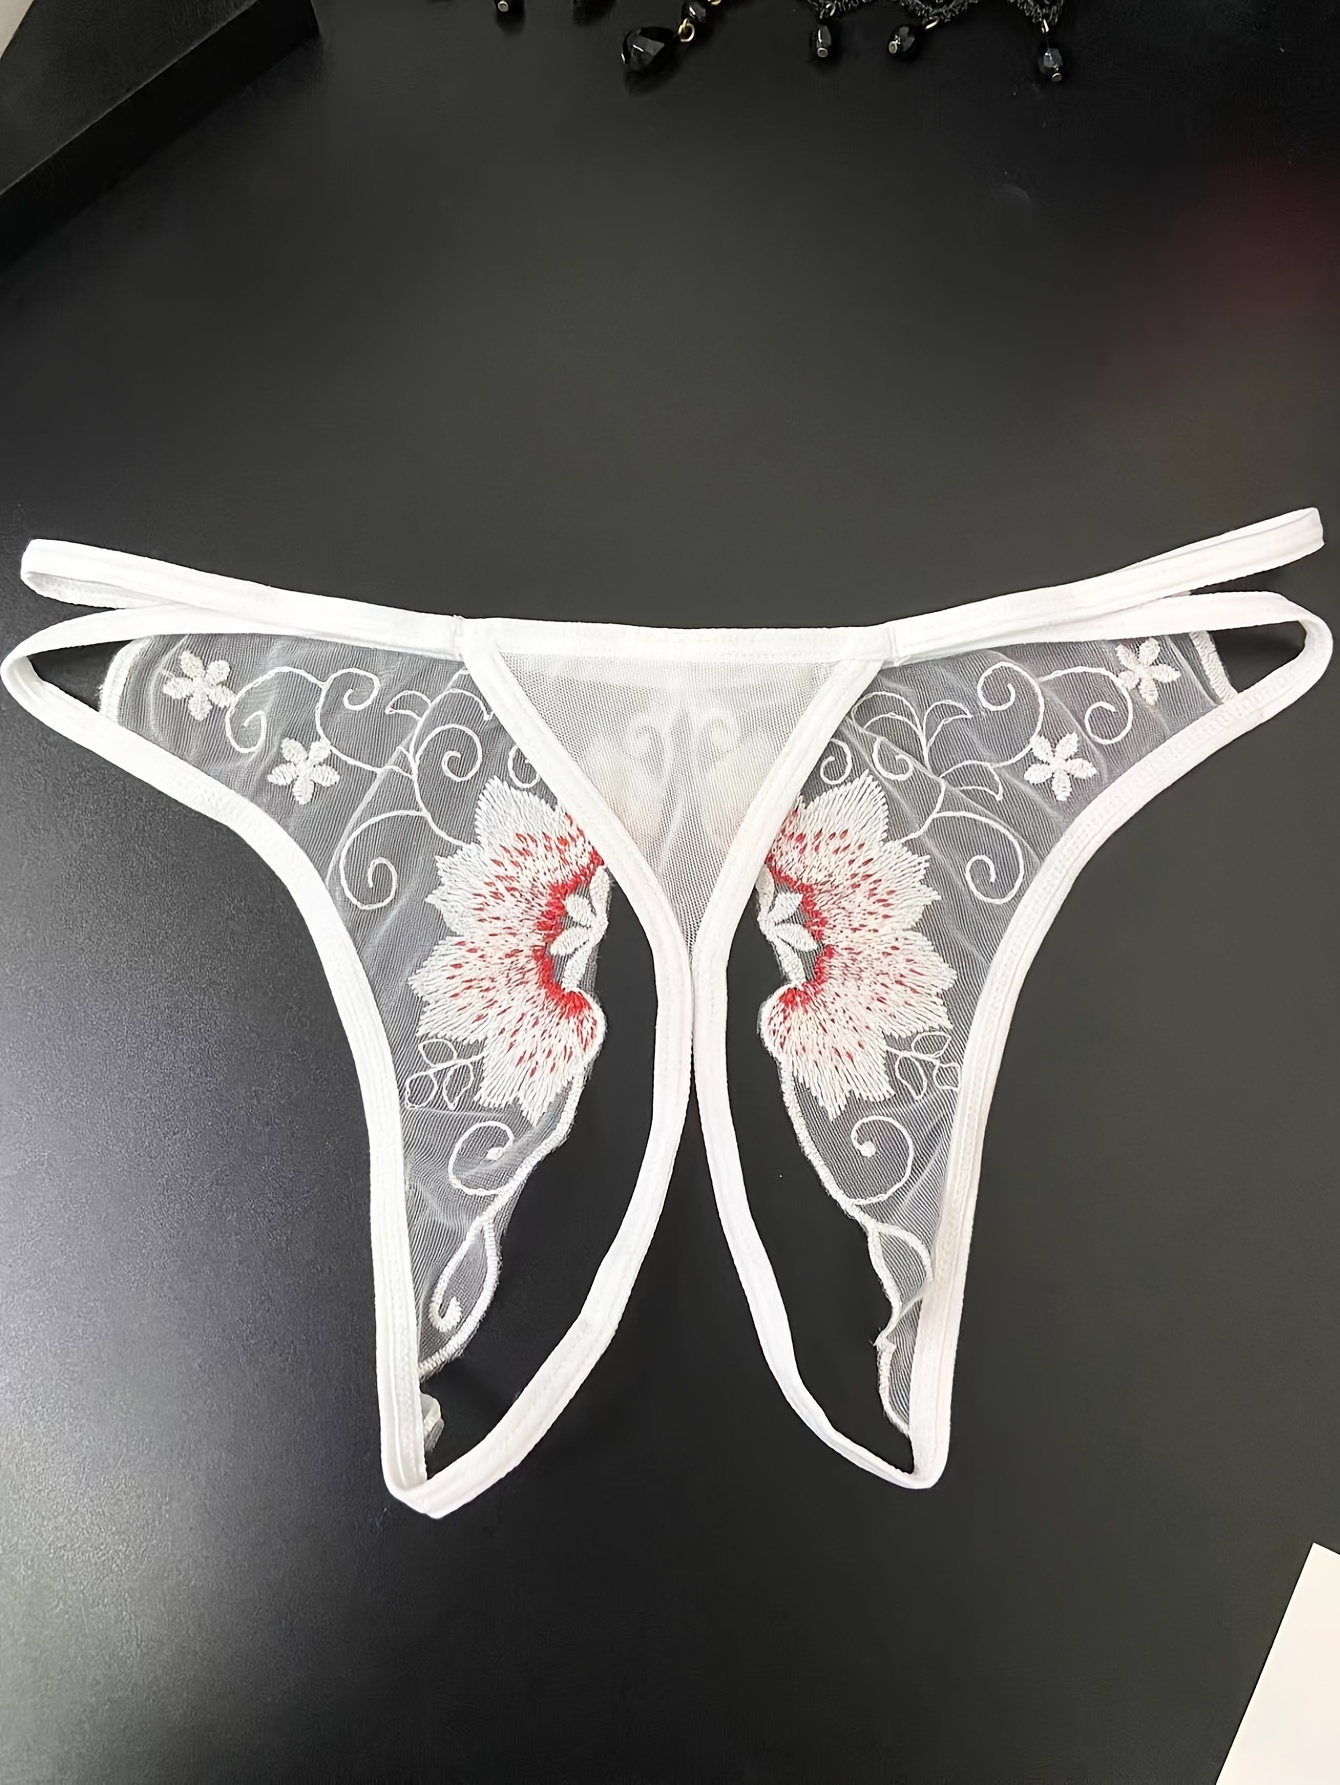 Women's Sexy Underwear, French Embroidery Design, Open Crotch